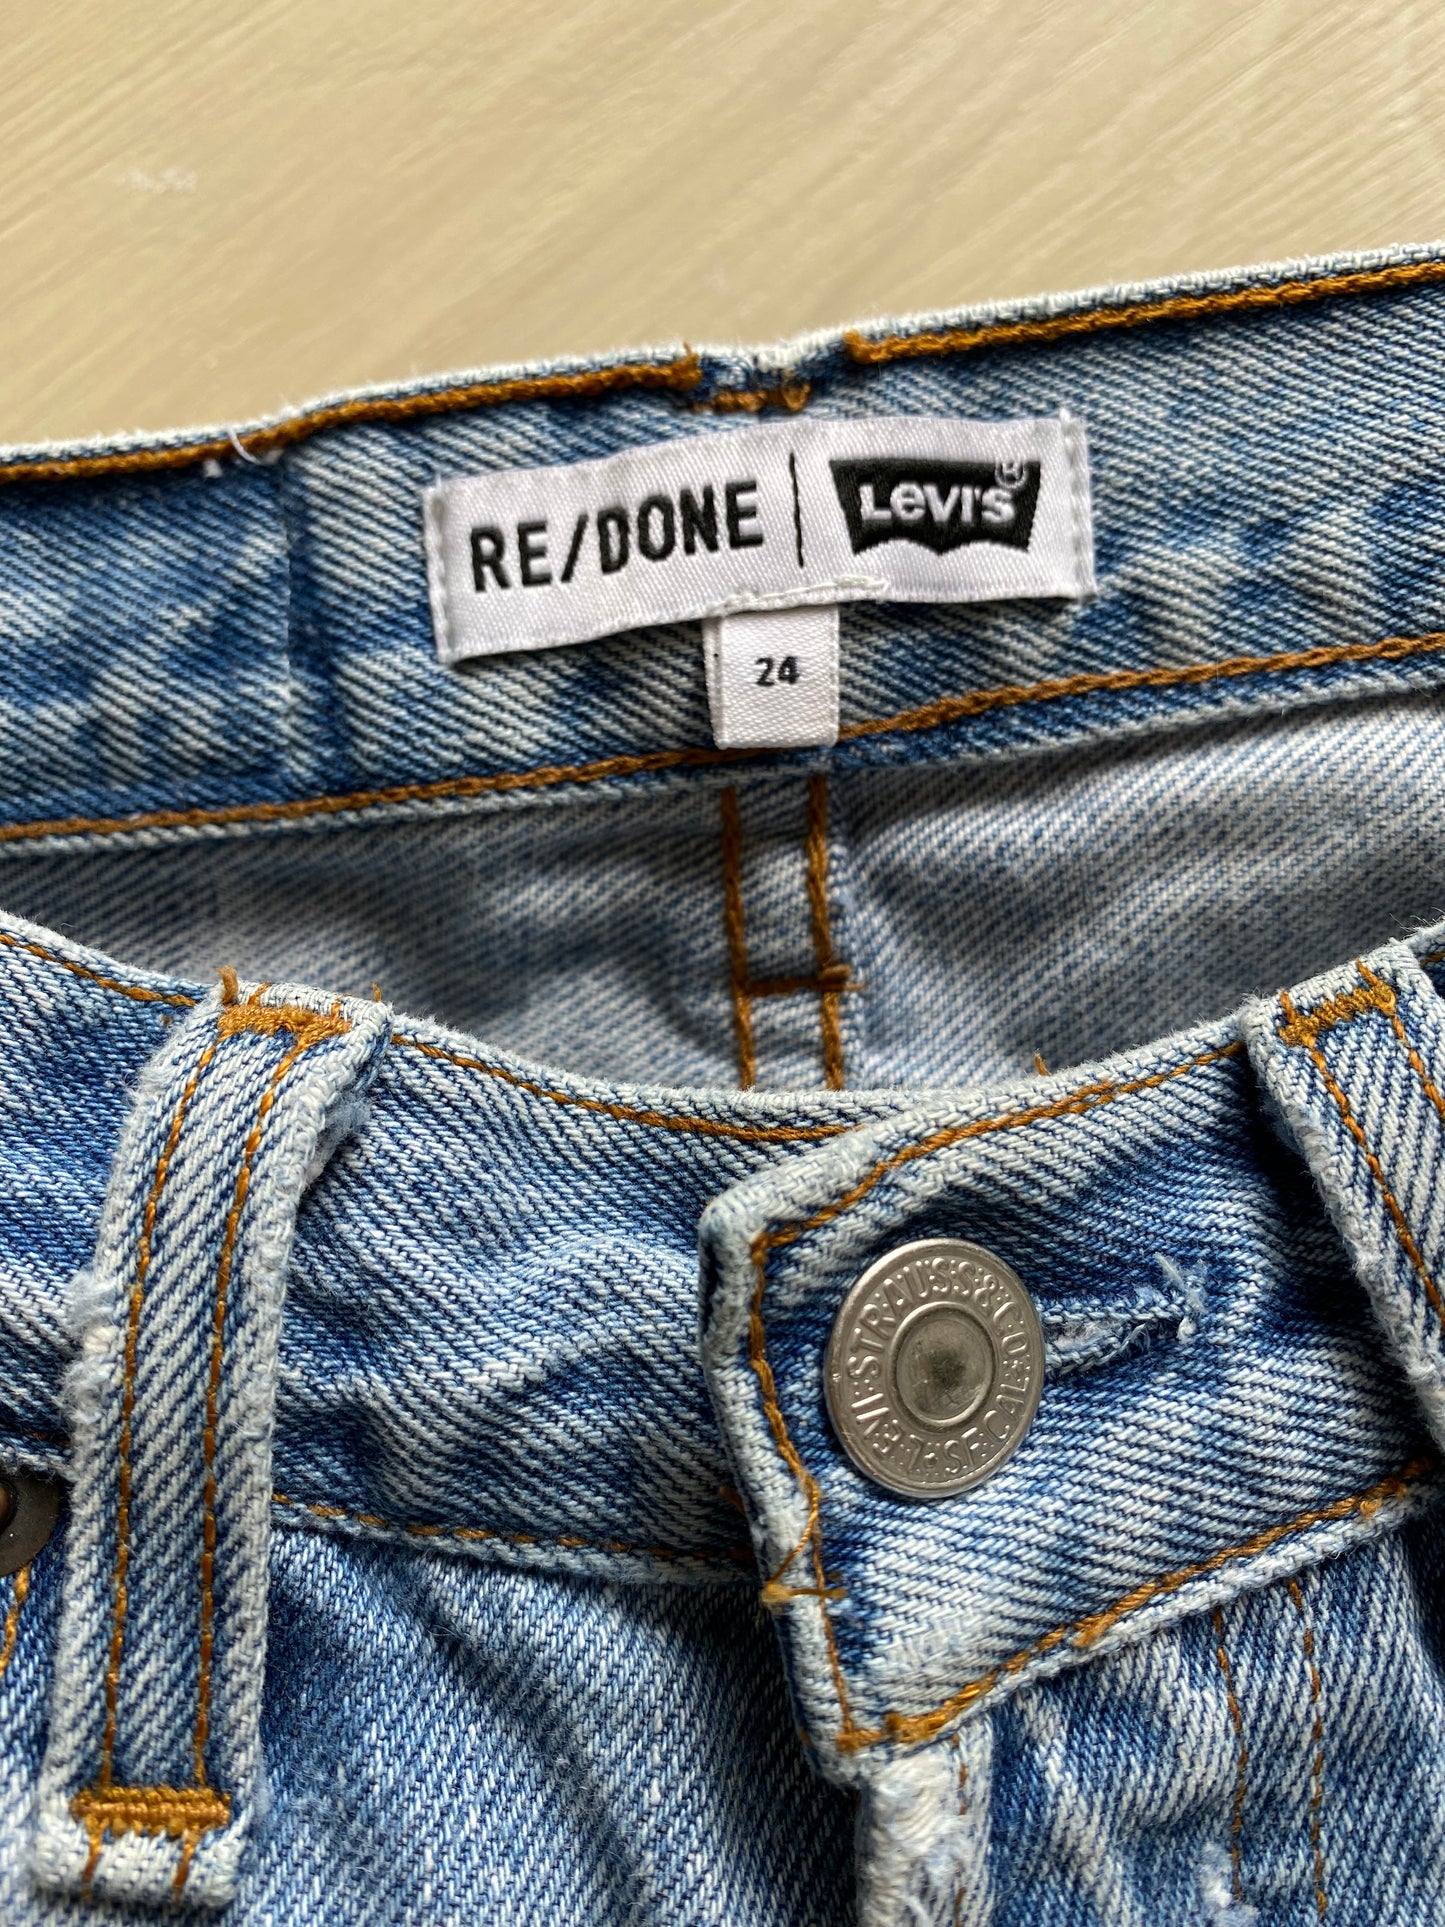 Size 24 Levi’s by RE/DONE